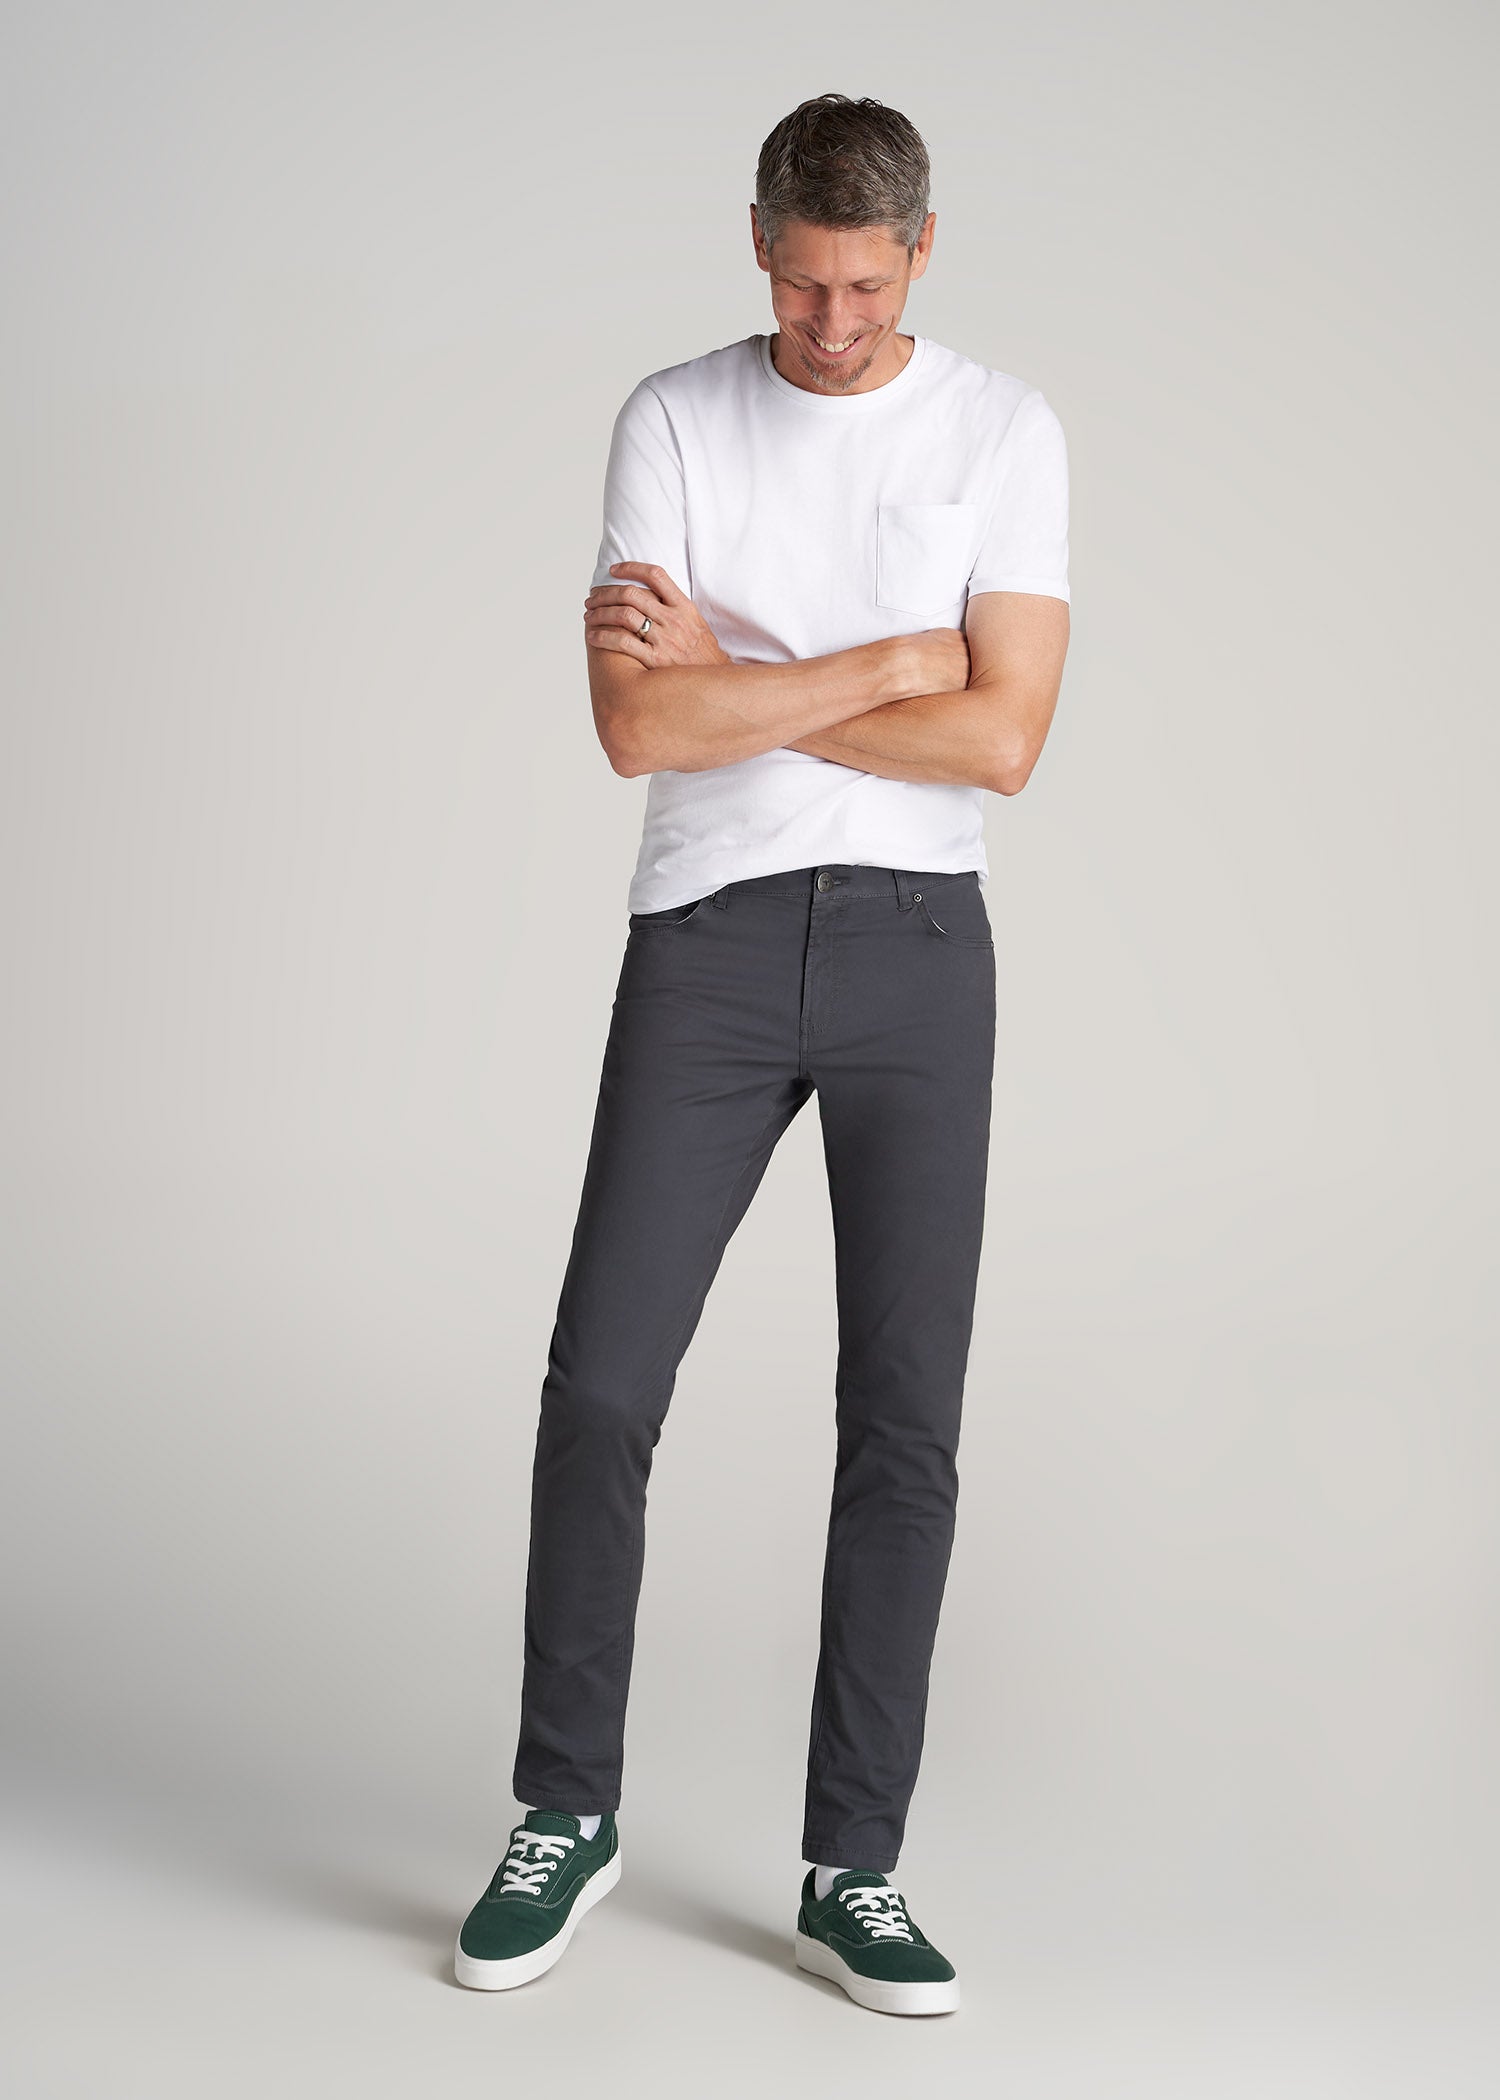 Carman TAPERED Jeans for Tall Men in Grey